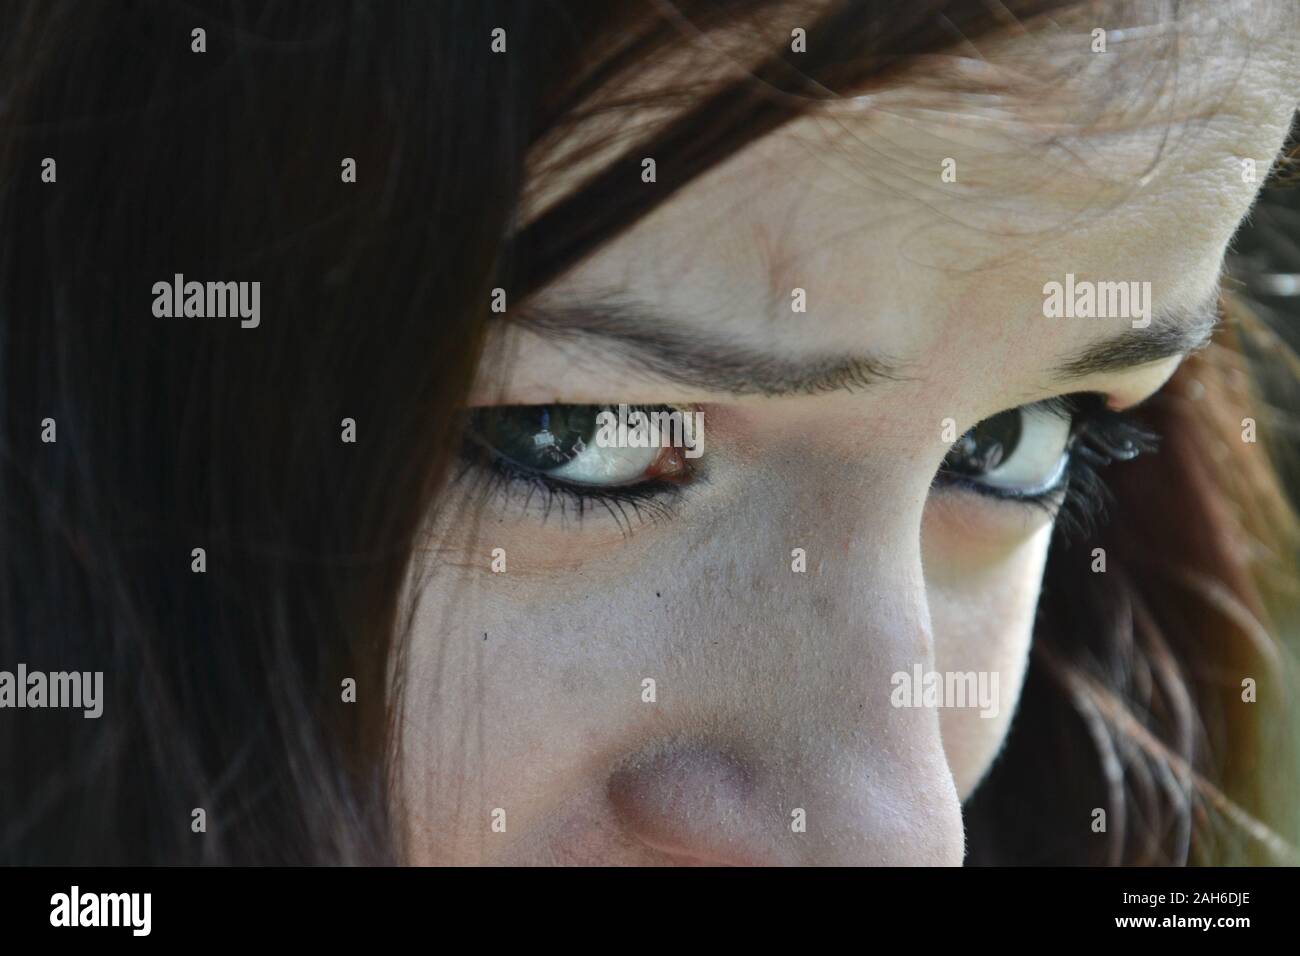 Close up of the eyes of a lady with brunette hair, eye liner and mascara, looking concerned and worried Stock Photo